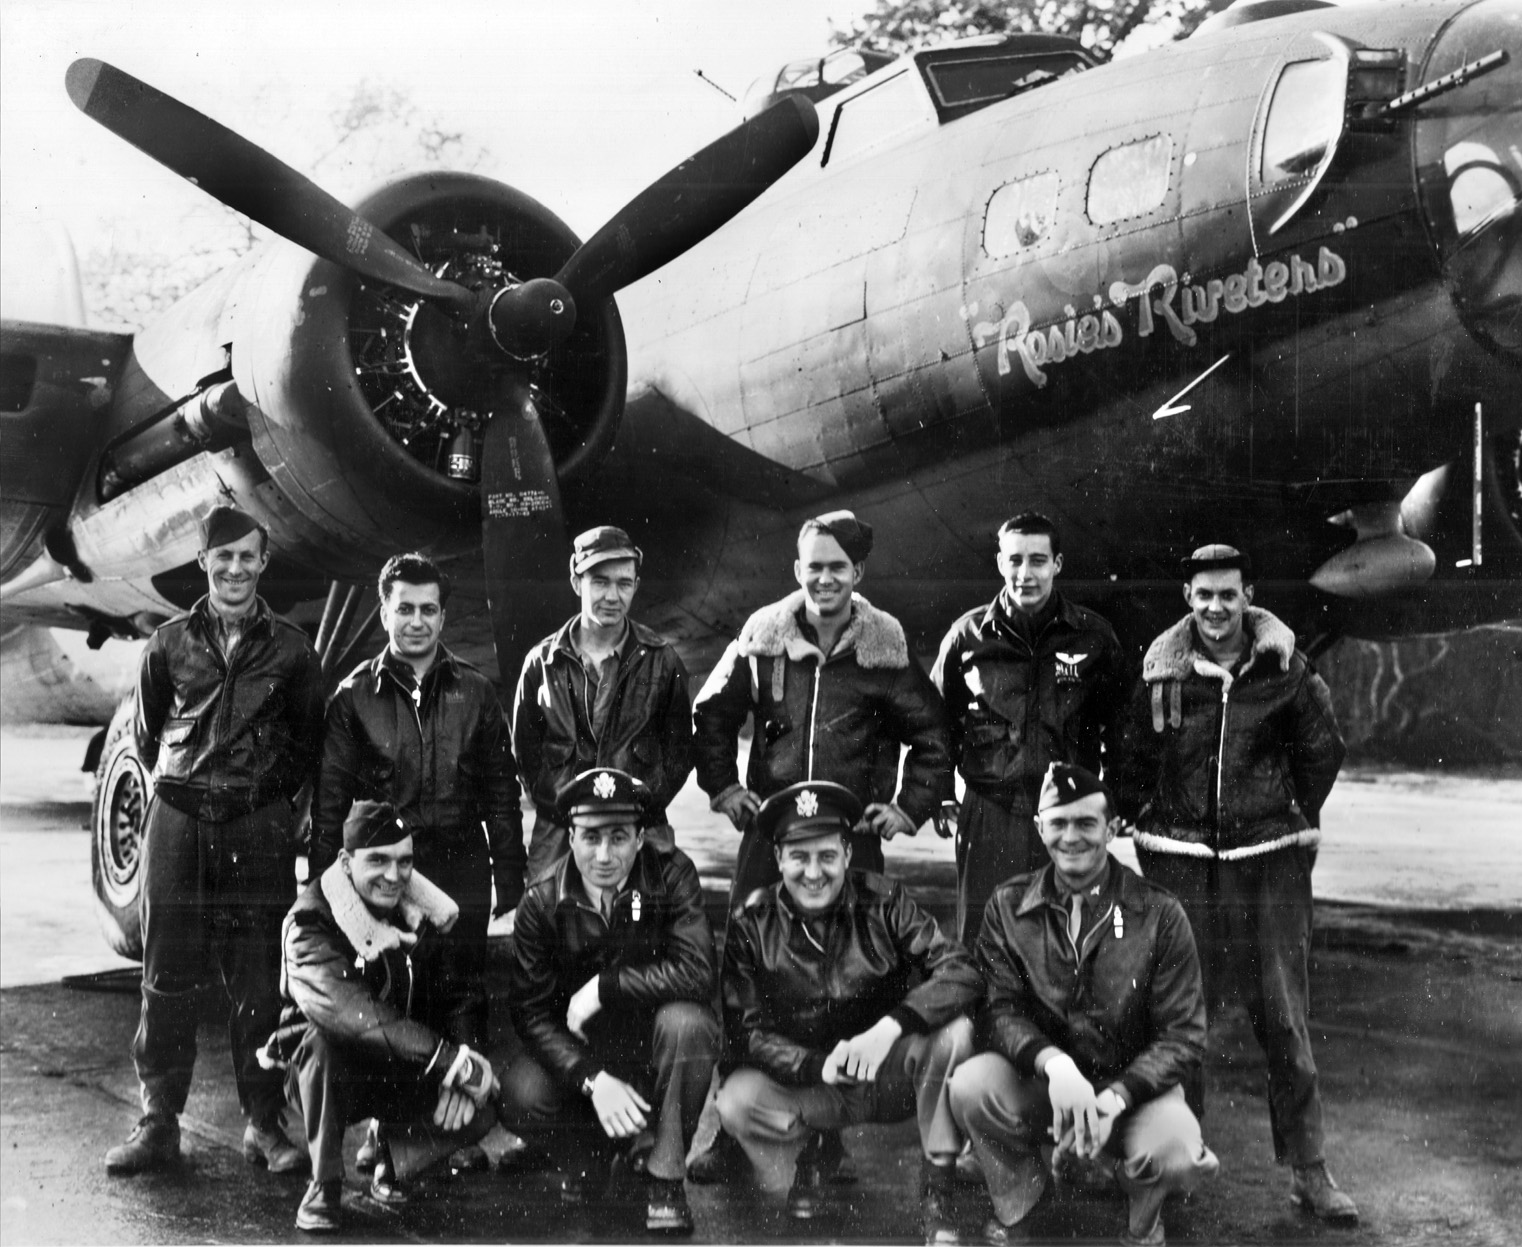 The crew of the 100th Bomb Group B-17 Rosie’s Riveters poses for a photographer with pilot Robert Rosenthal kneeling second from left. Of the 13 B-17s from the 100th Bomb Group that participated in the Münster raid, only Rosie’s Riveters returned. Most of the bomb groups suffered heavy casualities during the raid. 